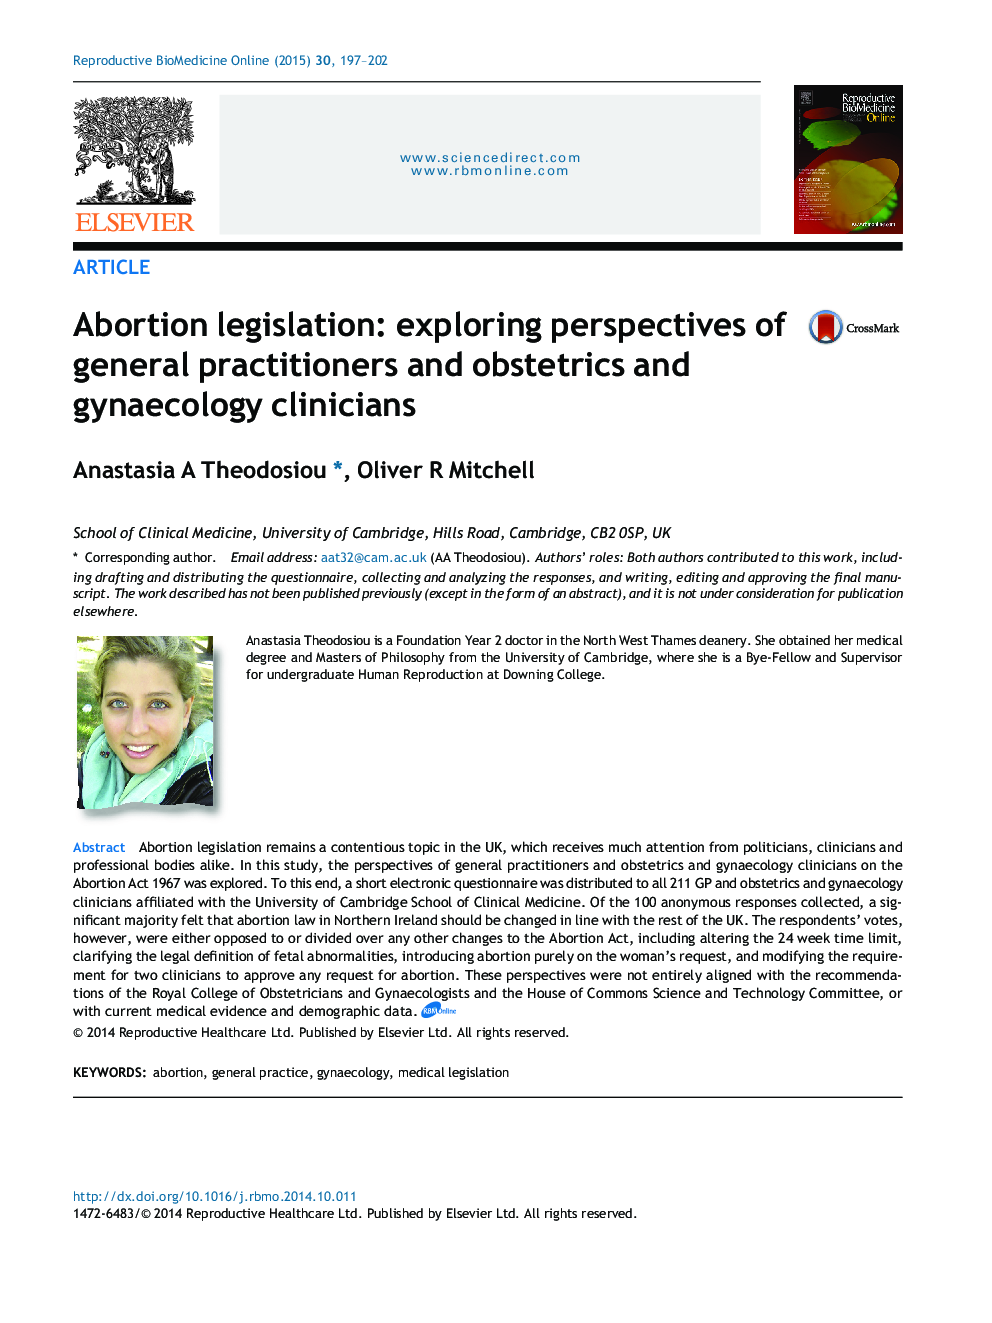 Abortion legislation: exploring perspectives of general practitioners and obstetrics and gynaecology clinicians